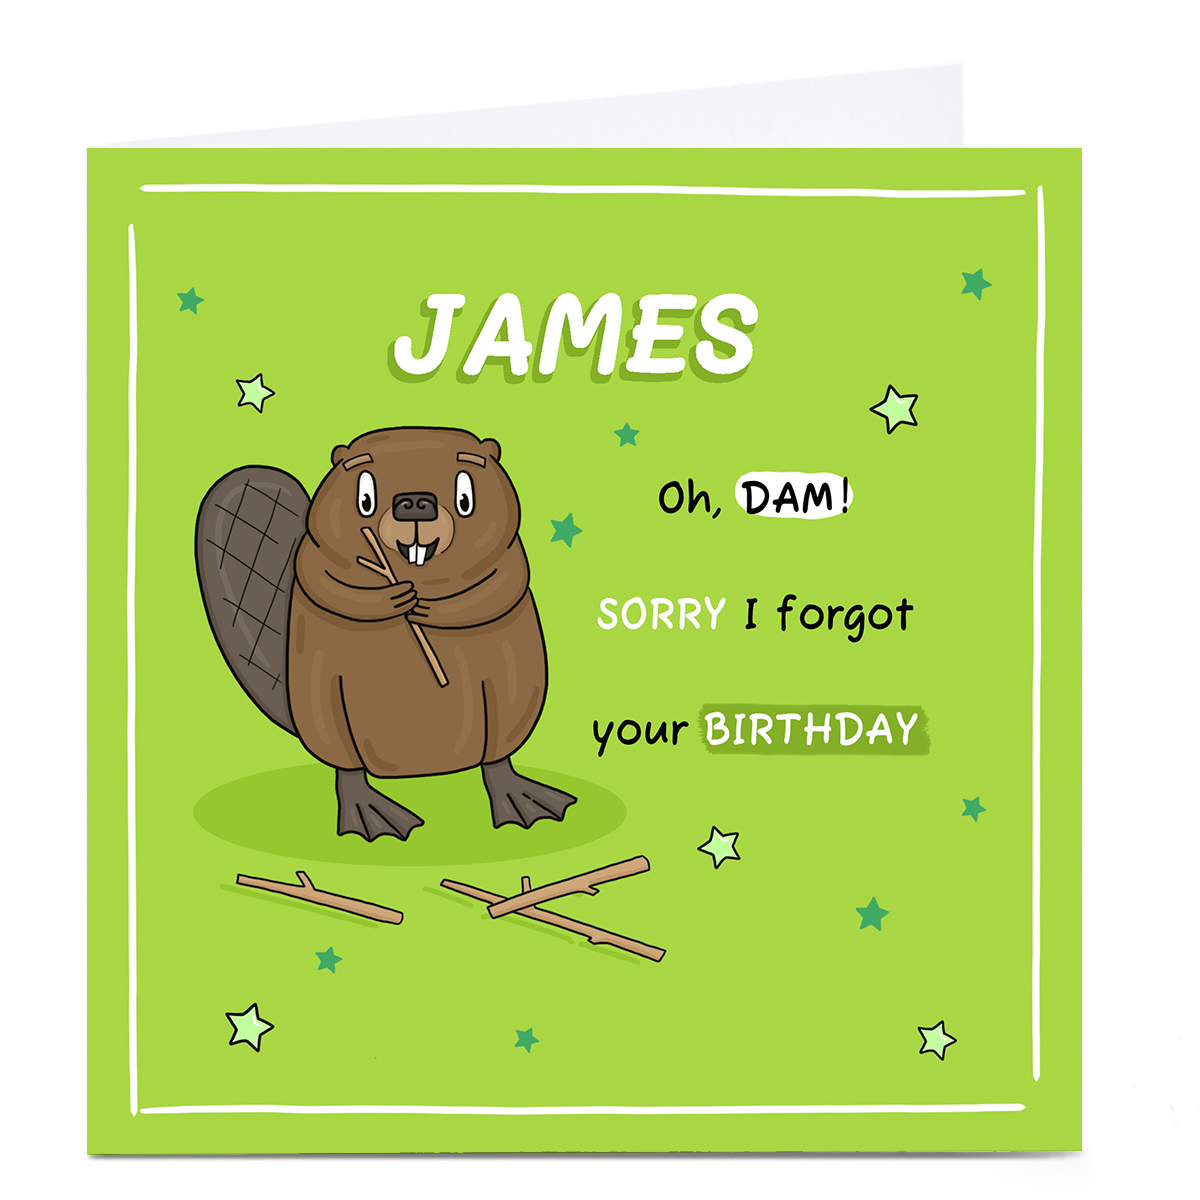 Personalised Belated Birthday Card - Oh, Dam!